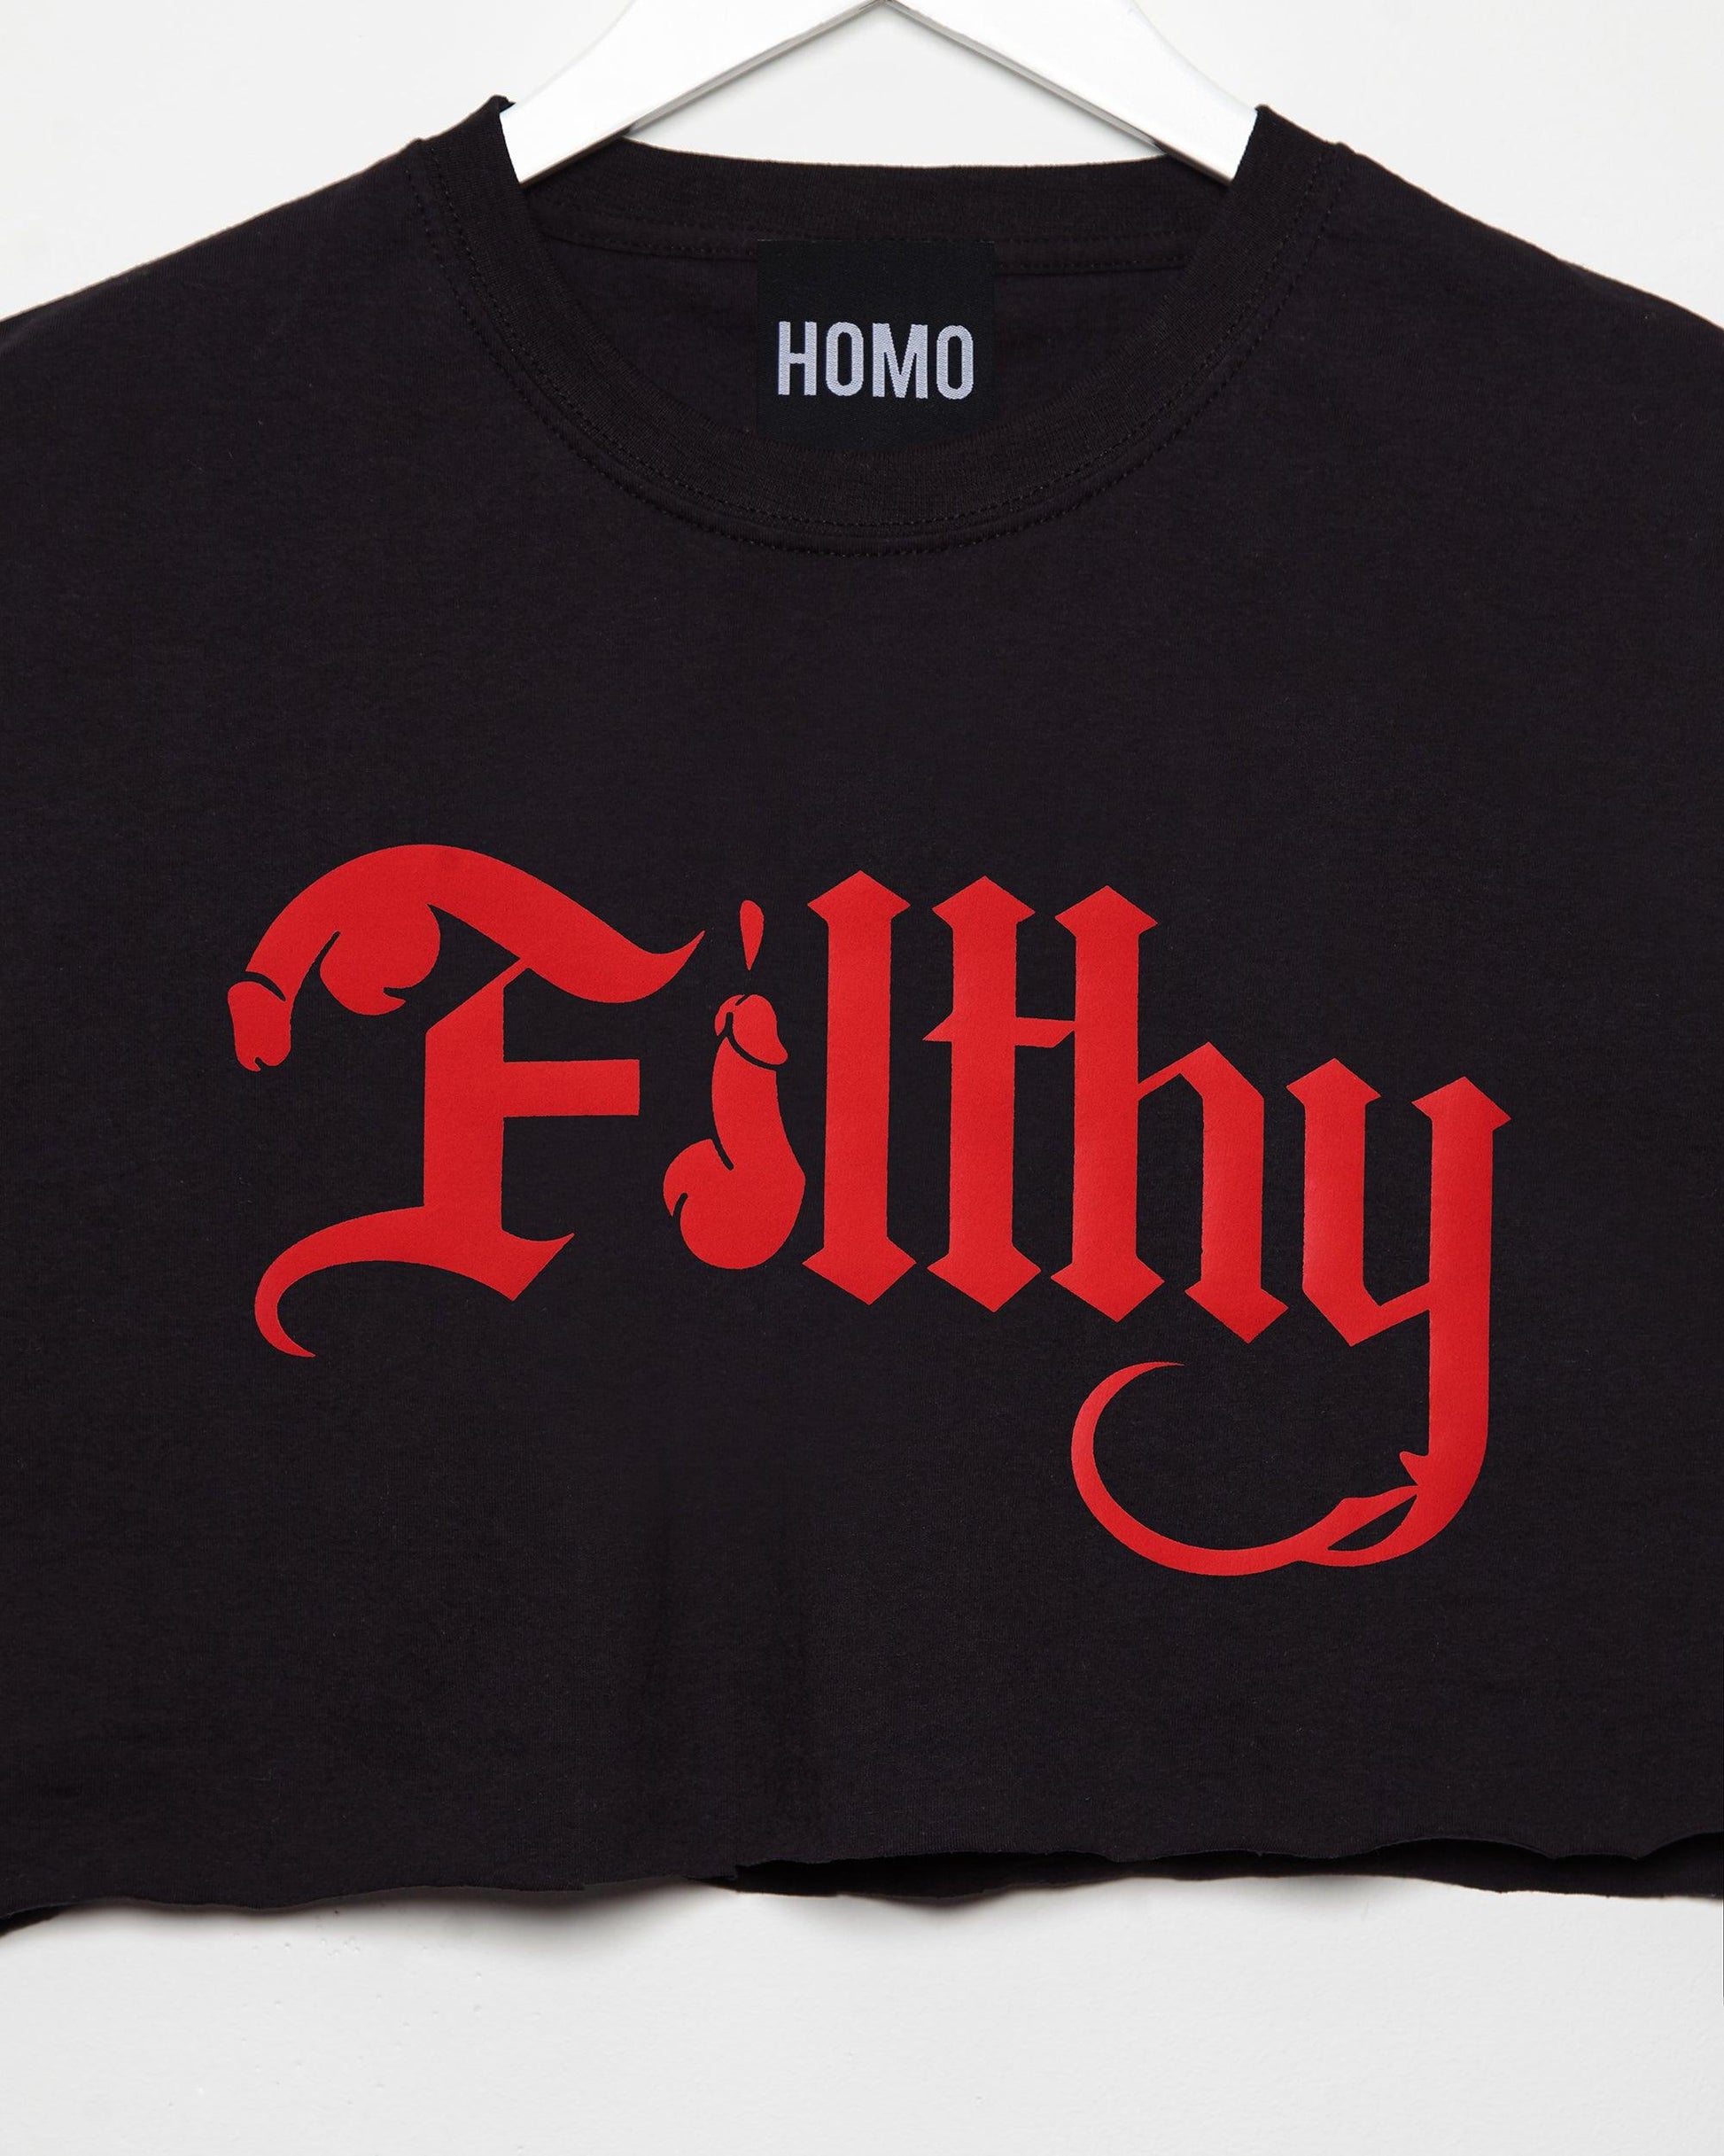 Filthy, red on black - mens sleeveless crop top. - HOMOLONDON